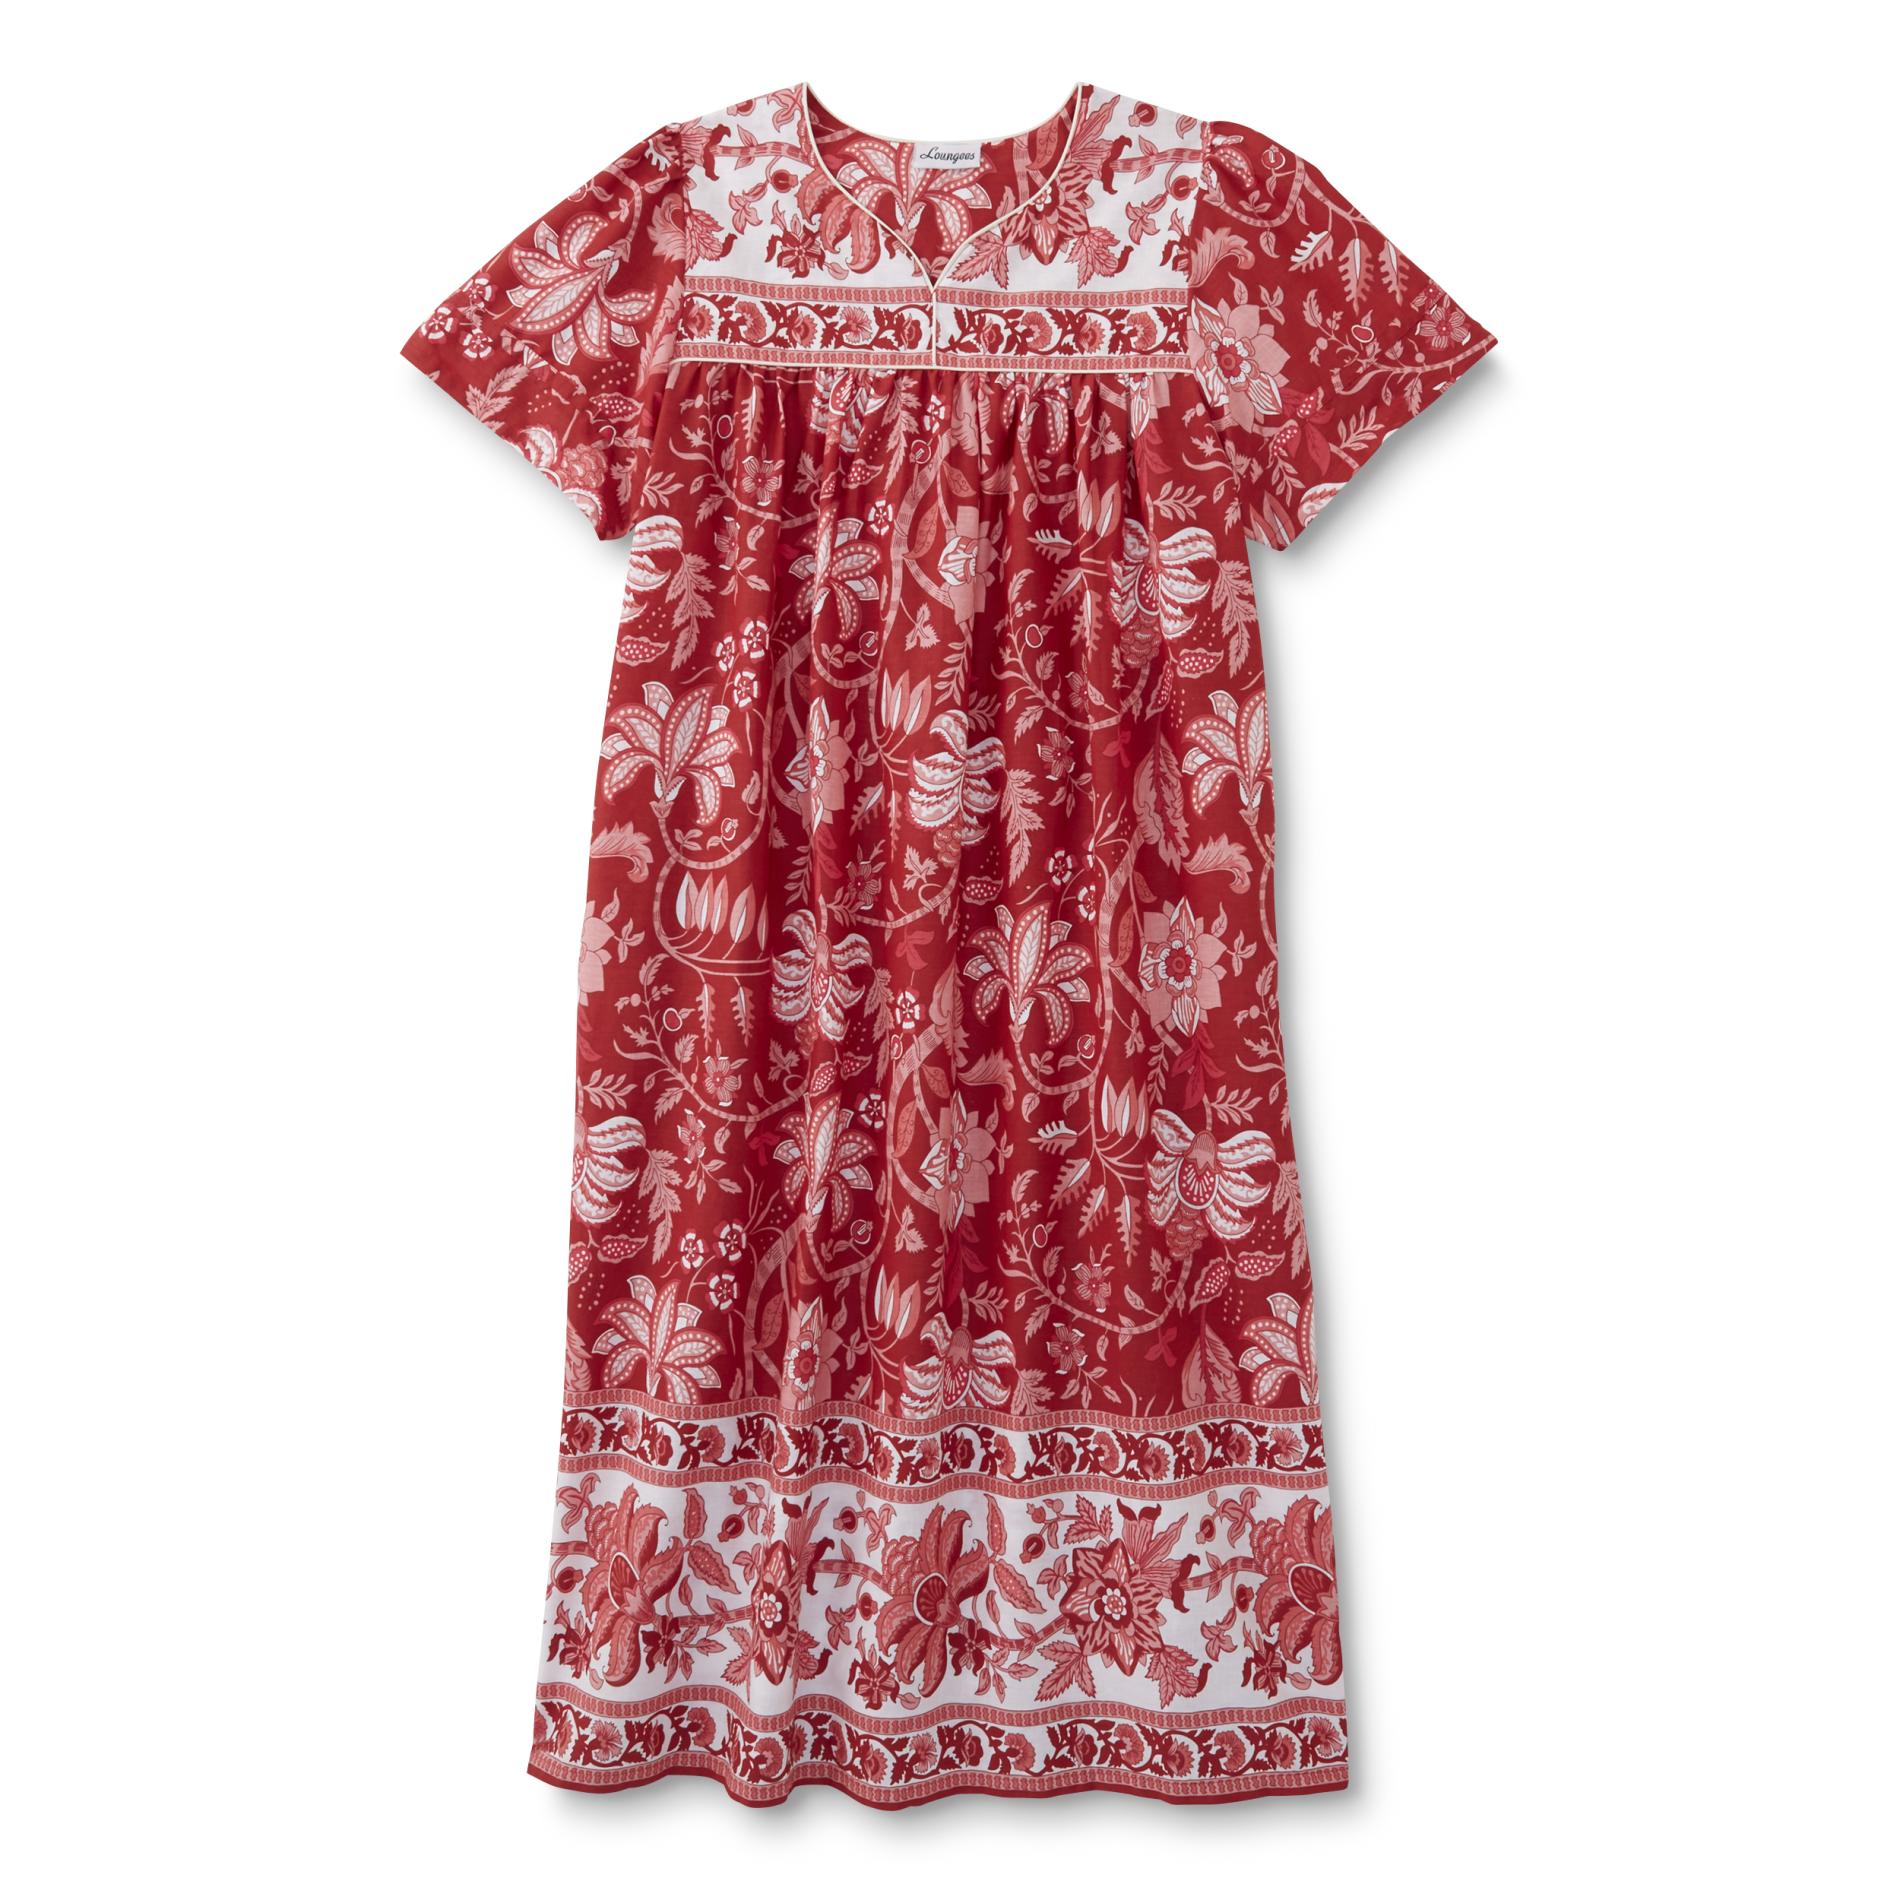 Loungees Women's Nightgown - Floral